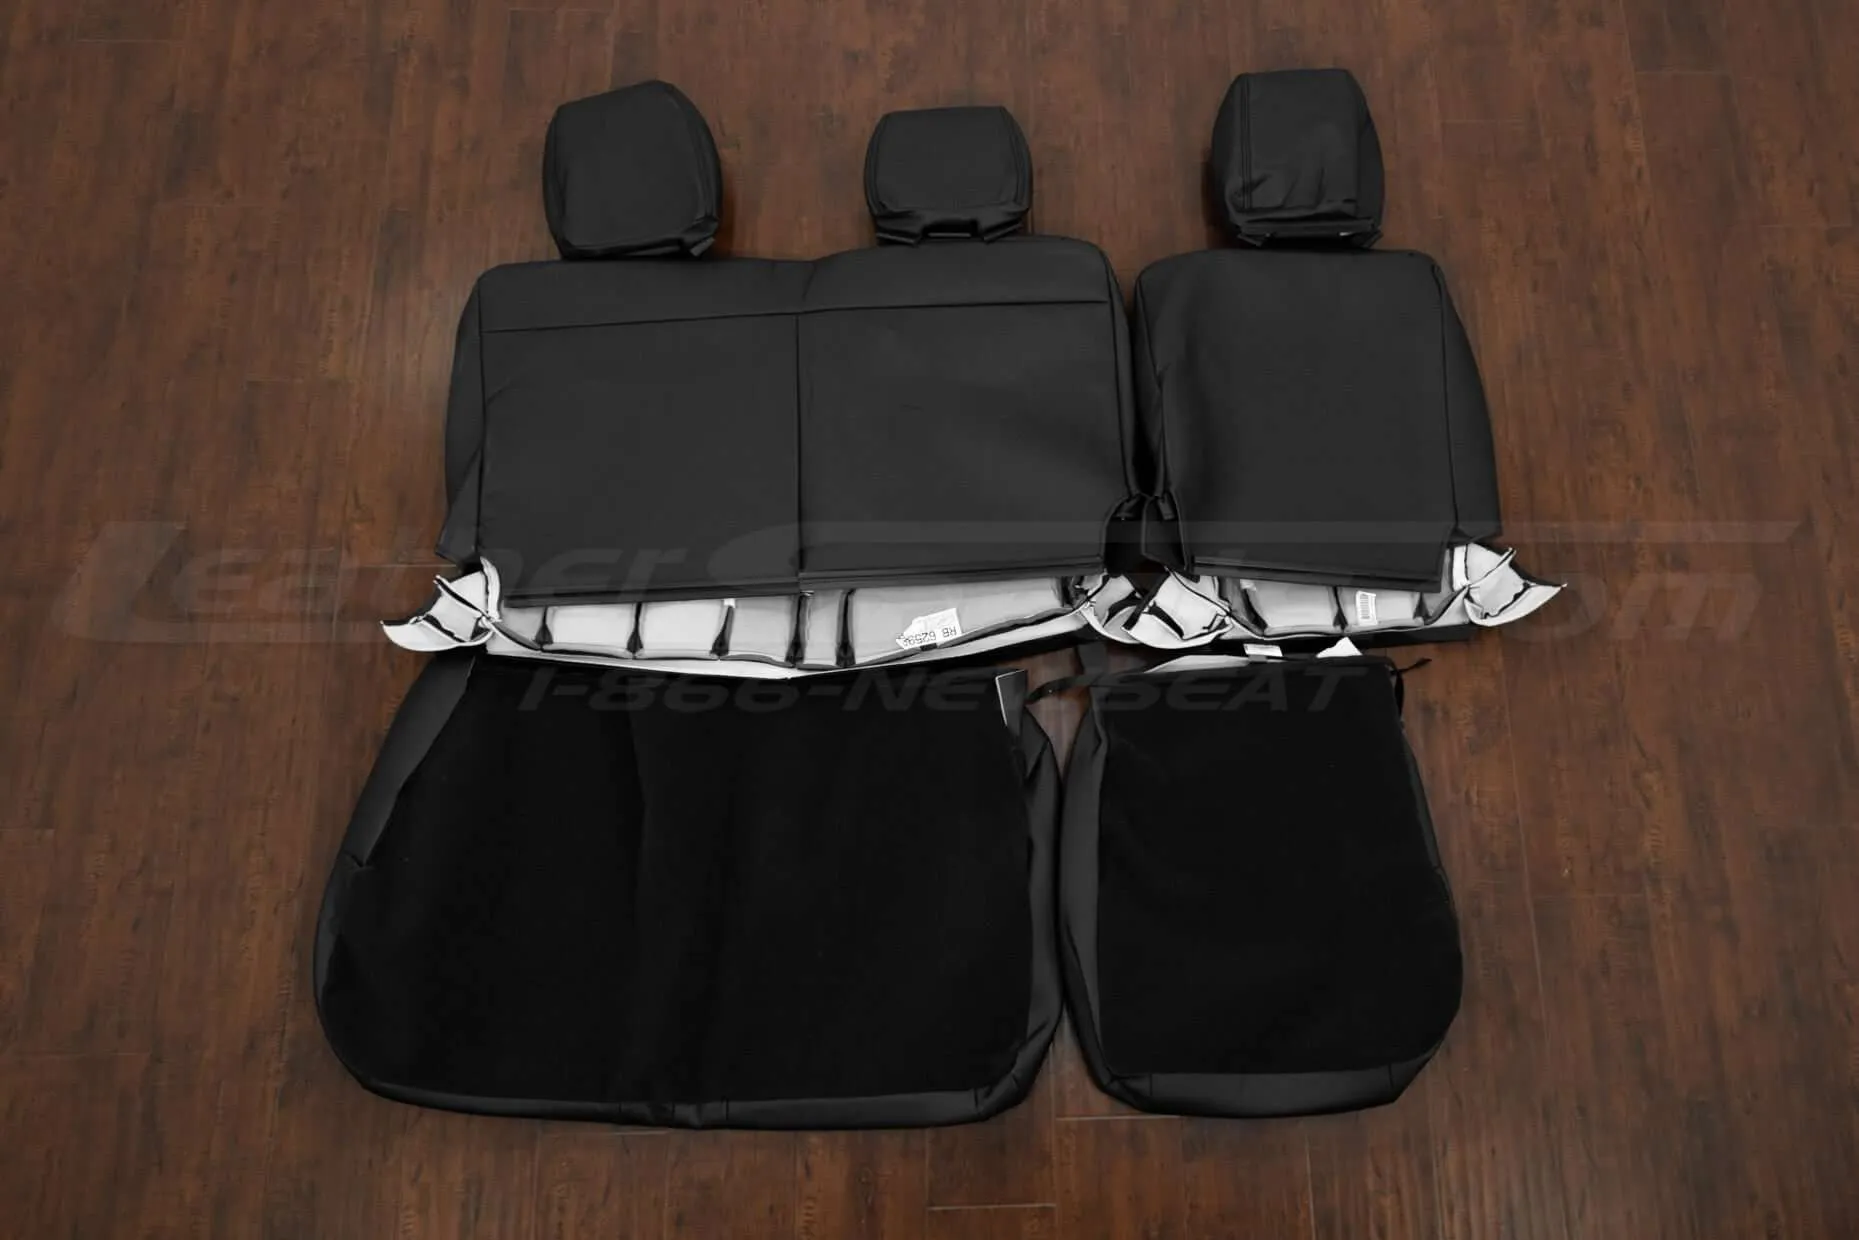 Back view of rear seat upholstery